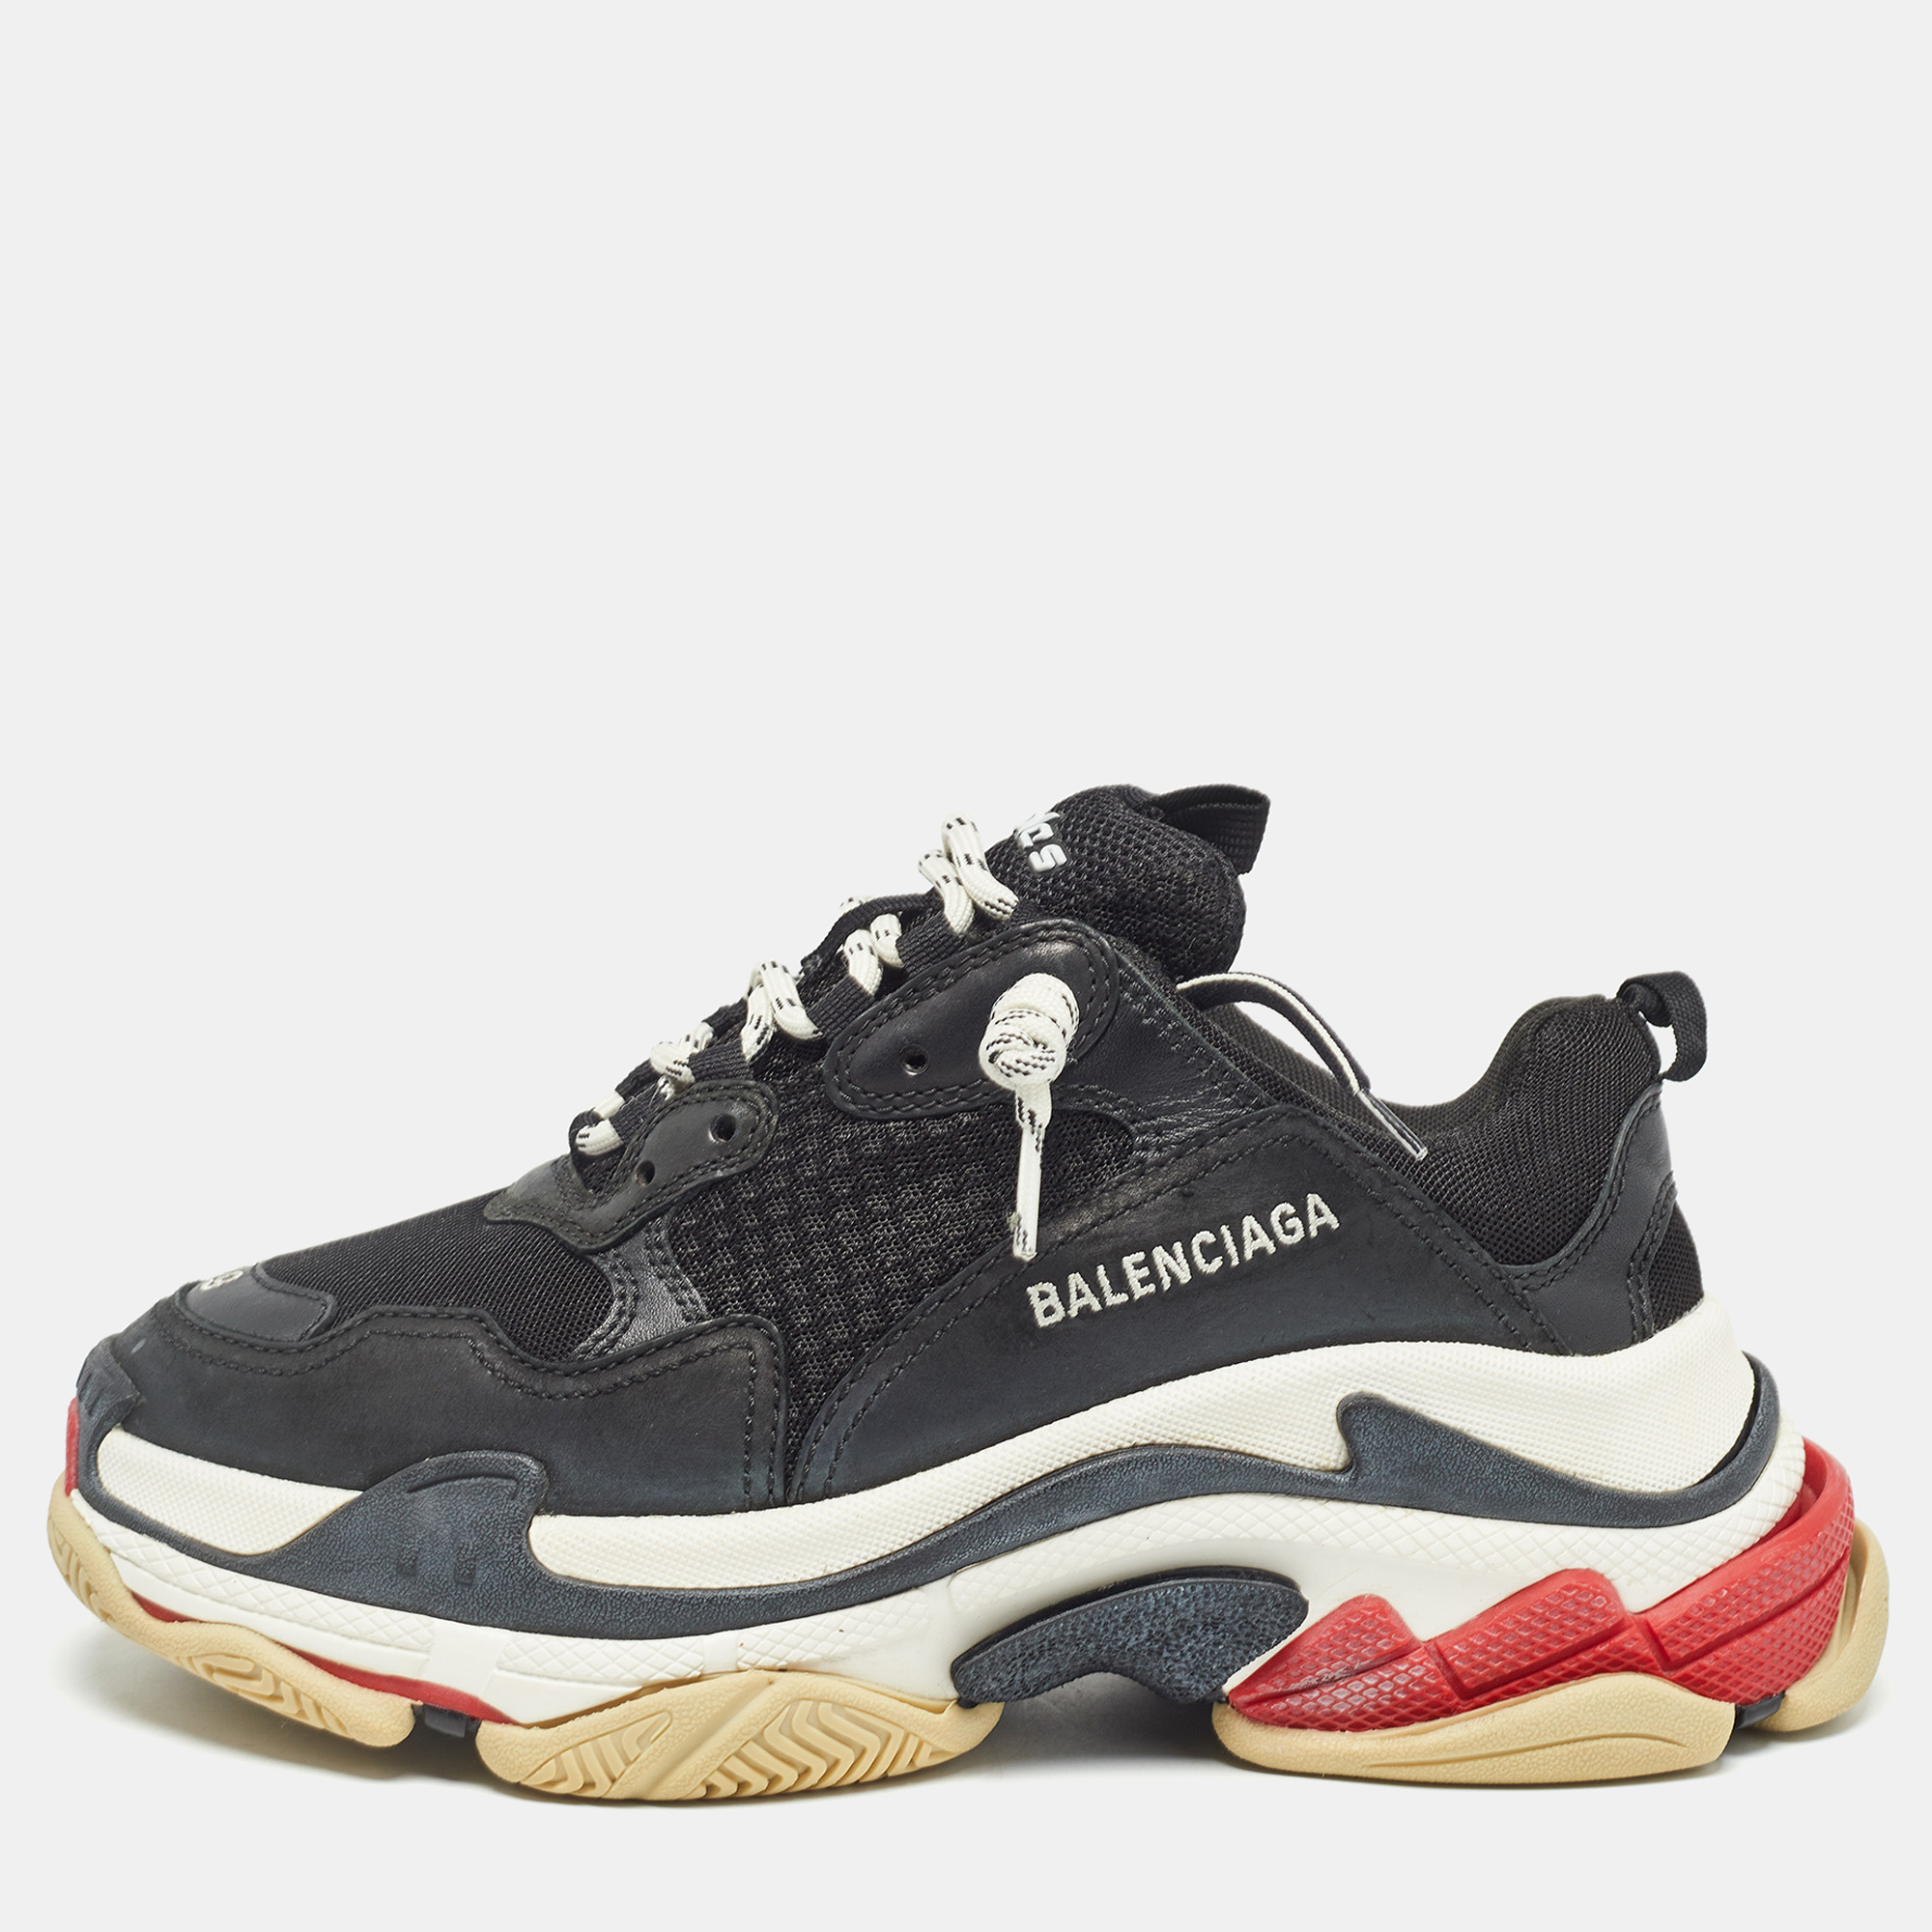 

Balenciaga Black Mesh and Leather Triple S Sneakers Size